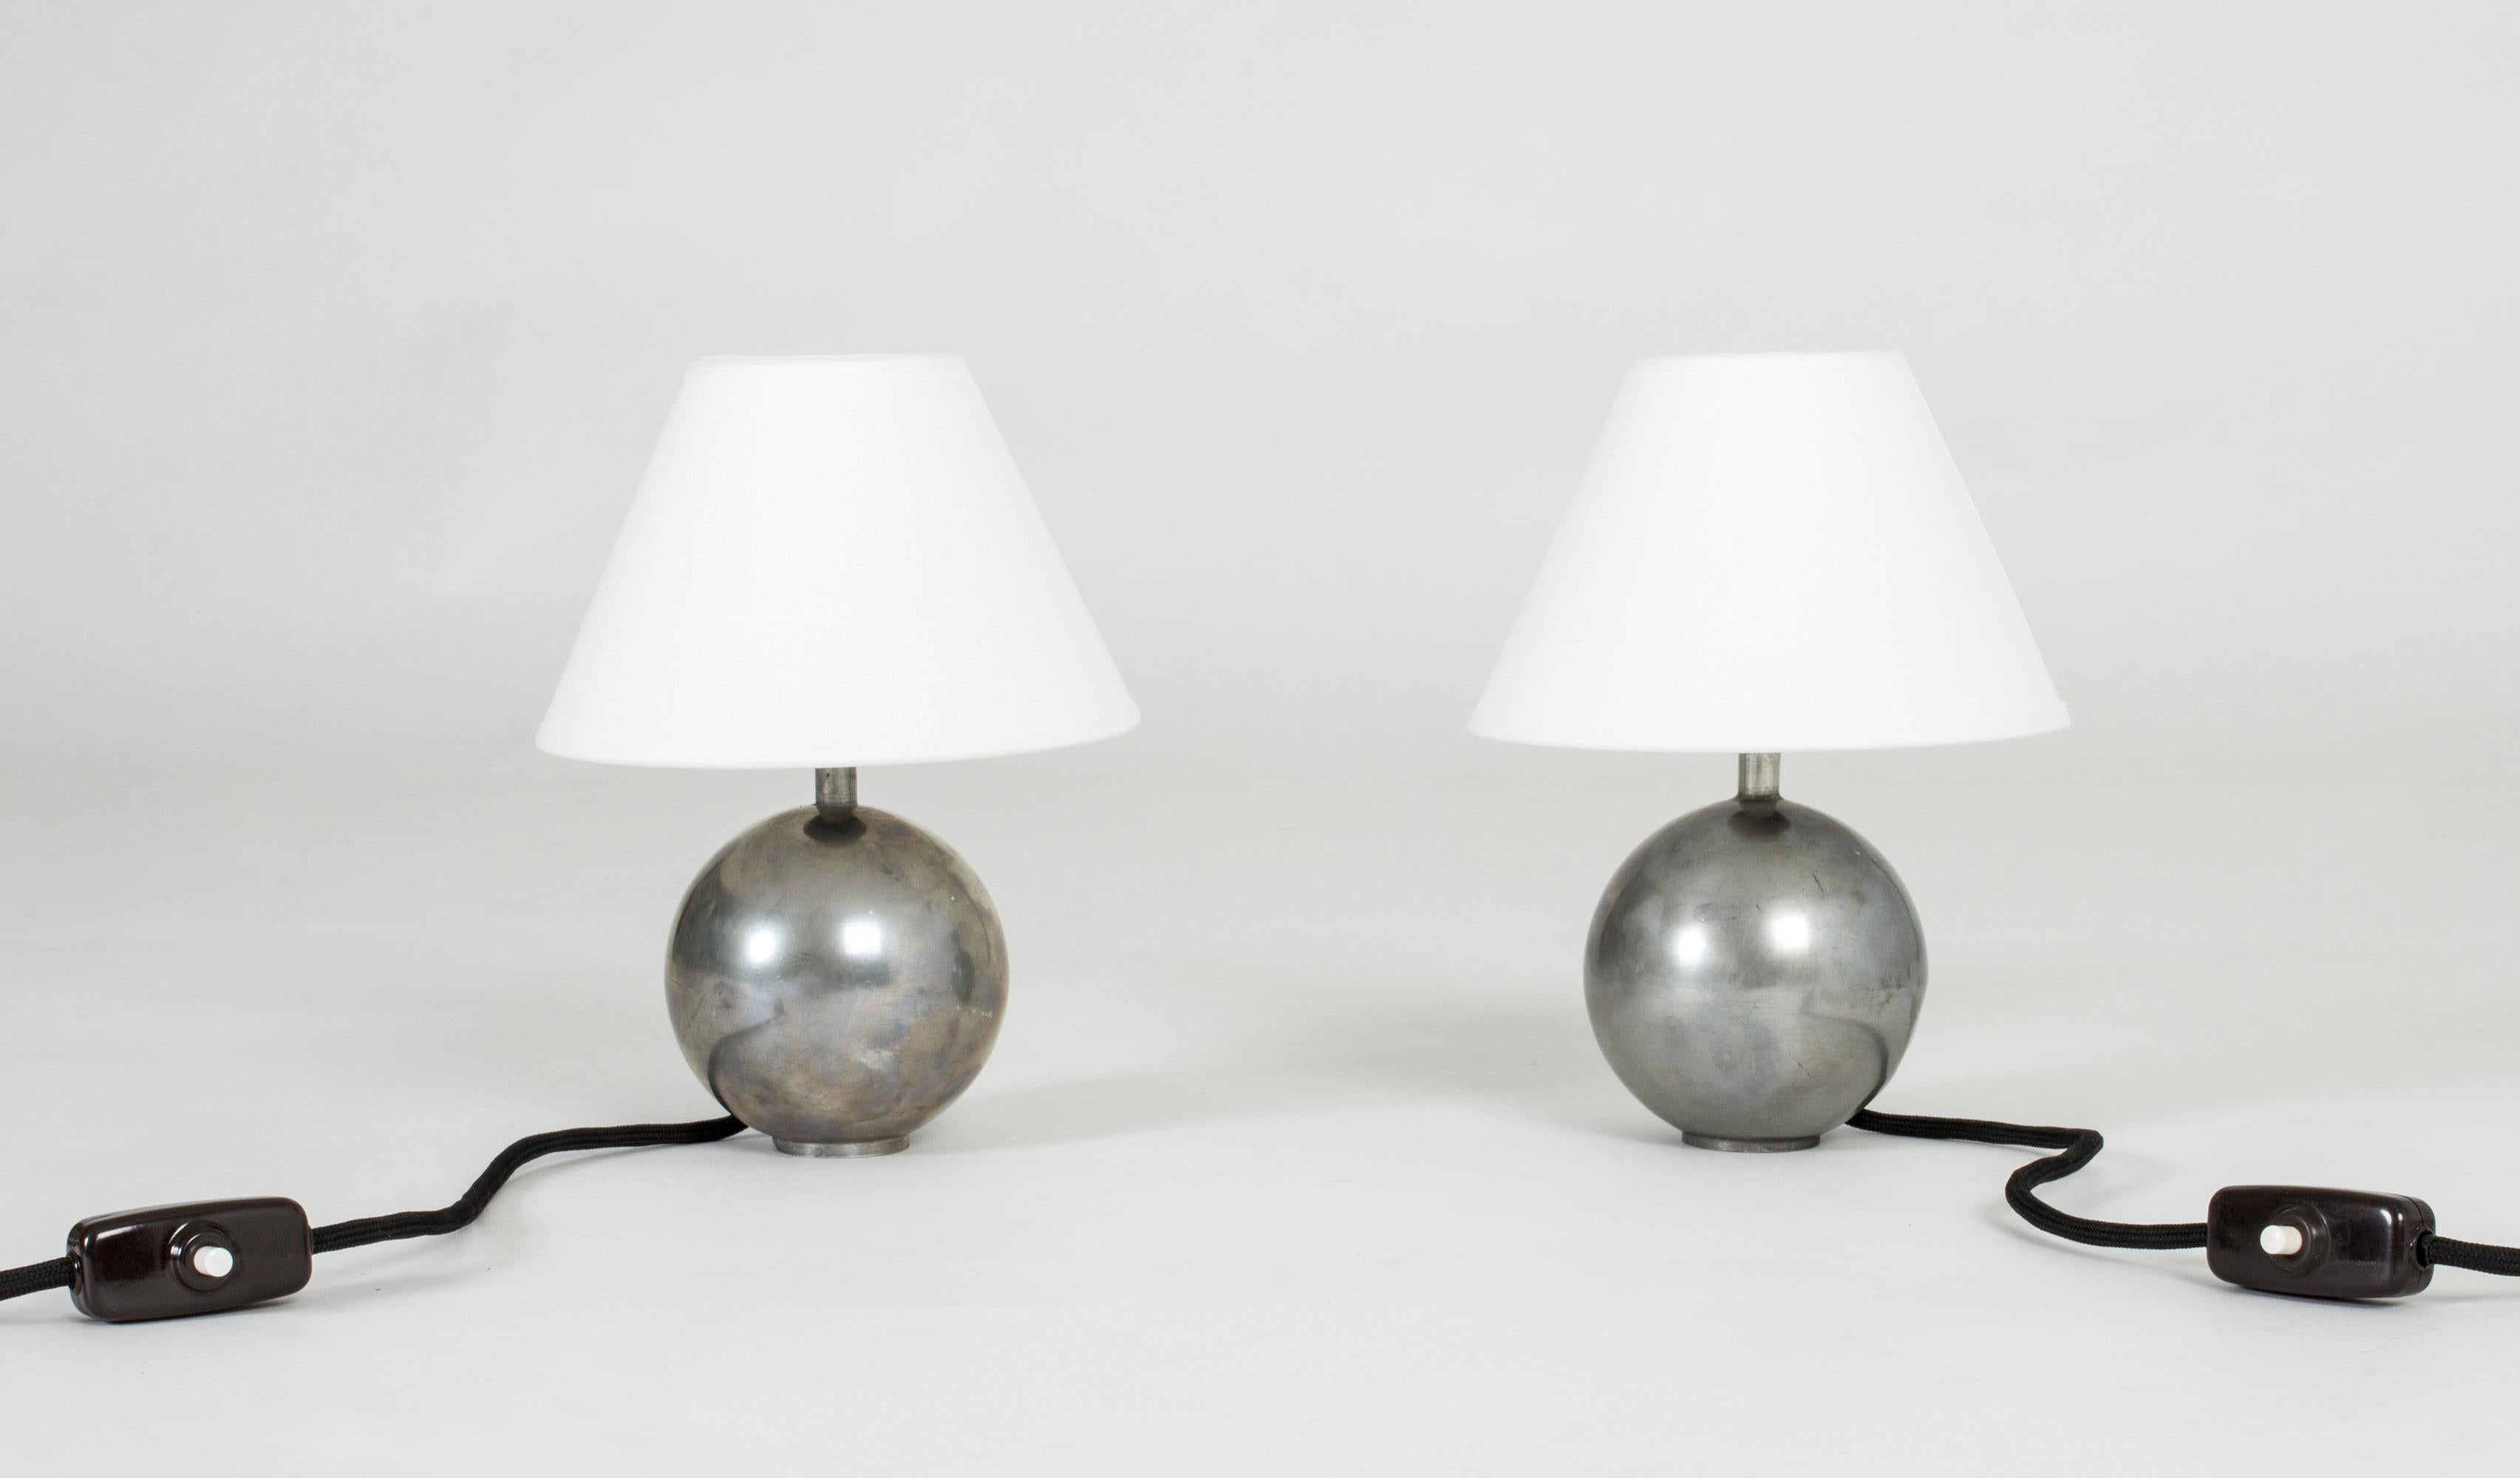 Pair of rare pewter table lamps by Björn Trädgårdh. Elegant design with neat globe-shaped bases.